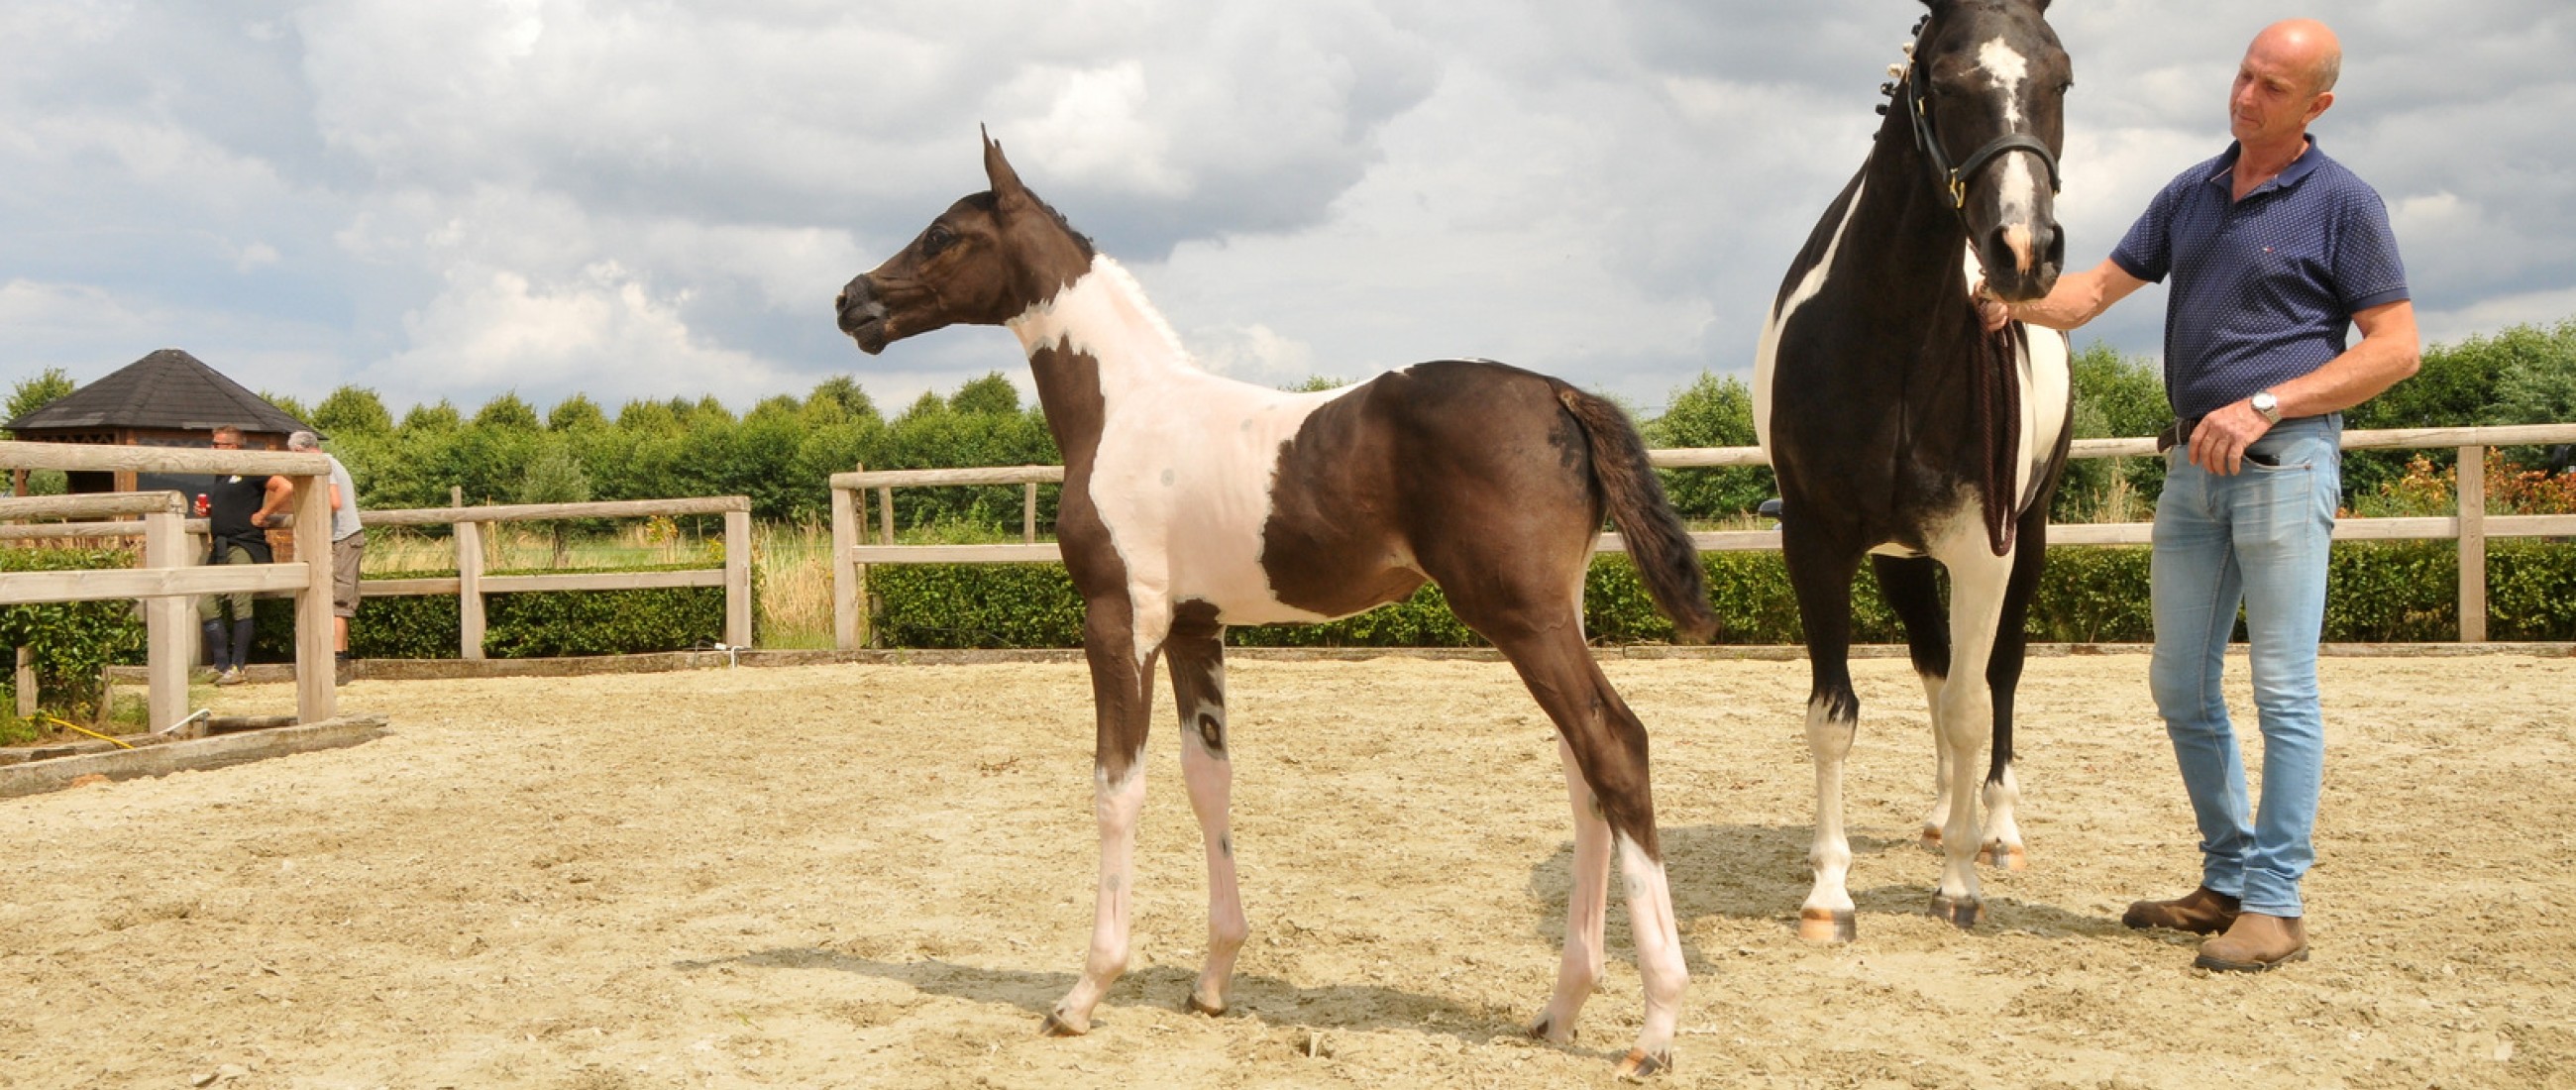 For Sale: 4 filly foals Belgian colored Sporthorses.